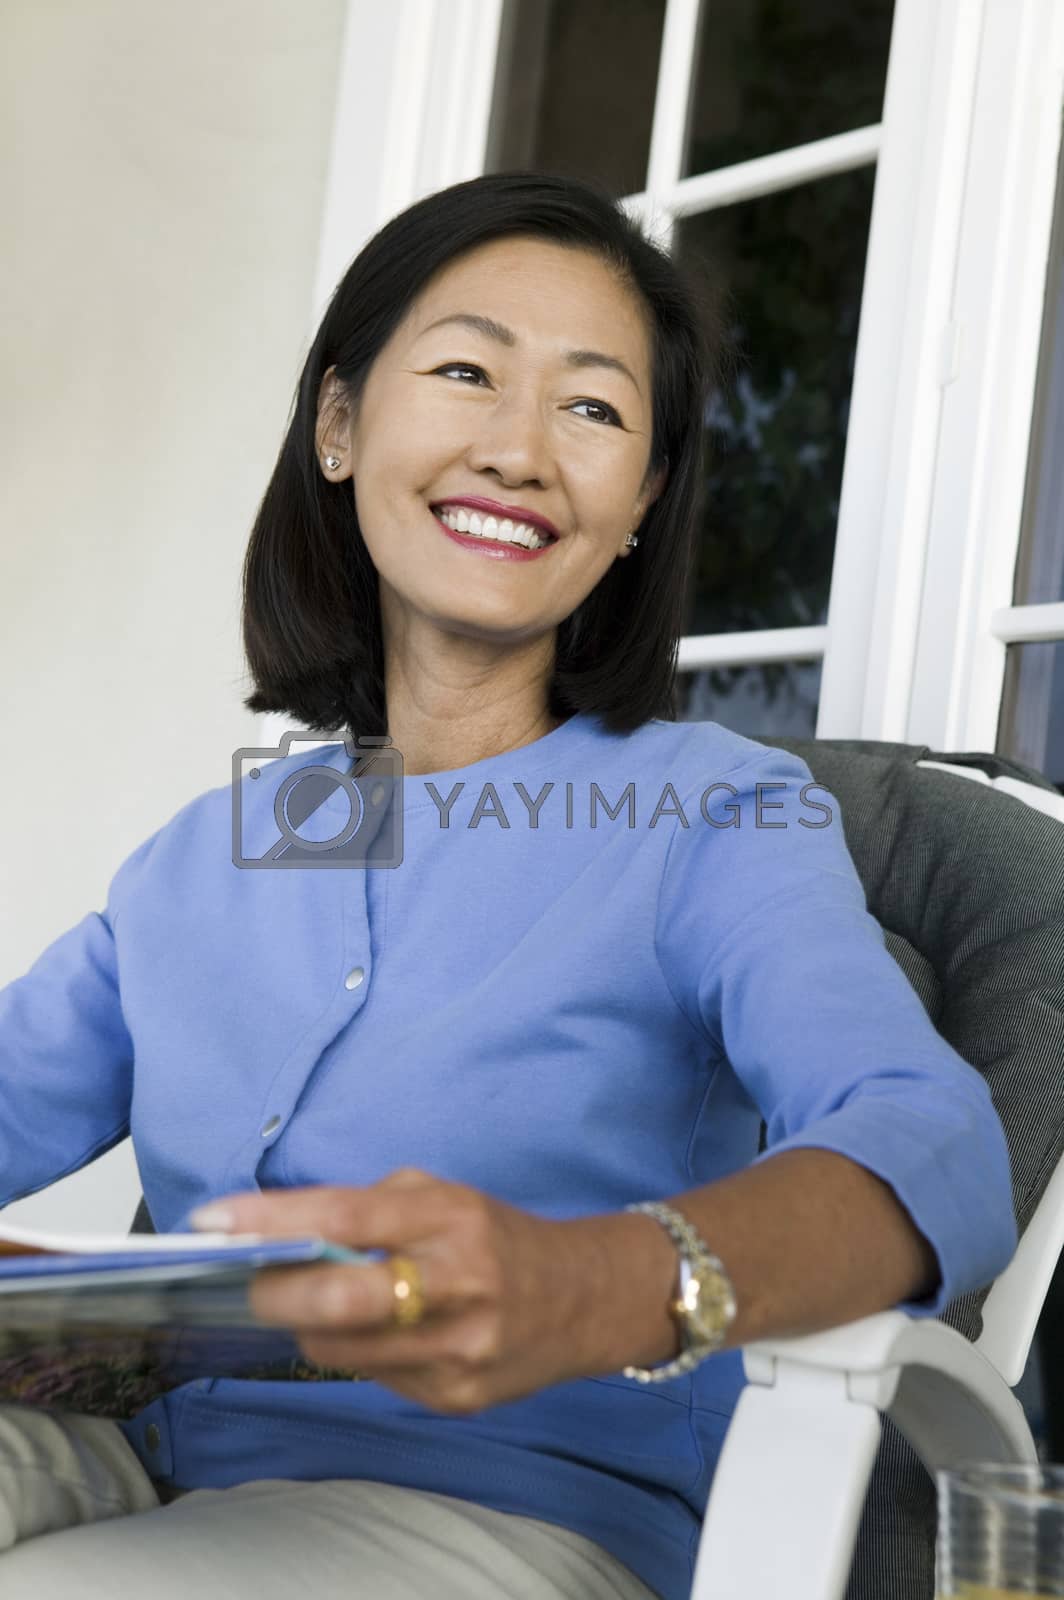 Royalty free image of Happy Asian woman looking away while sitting on chair holding magazine by moodboard